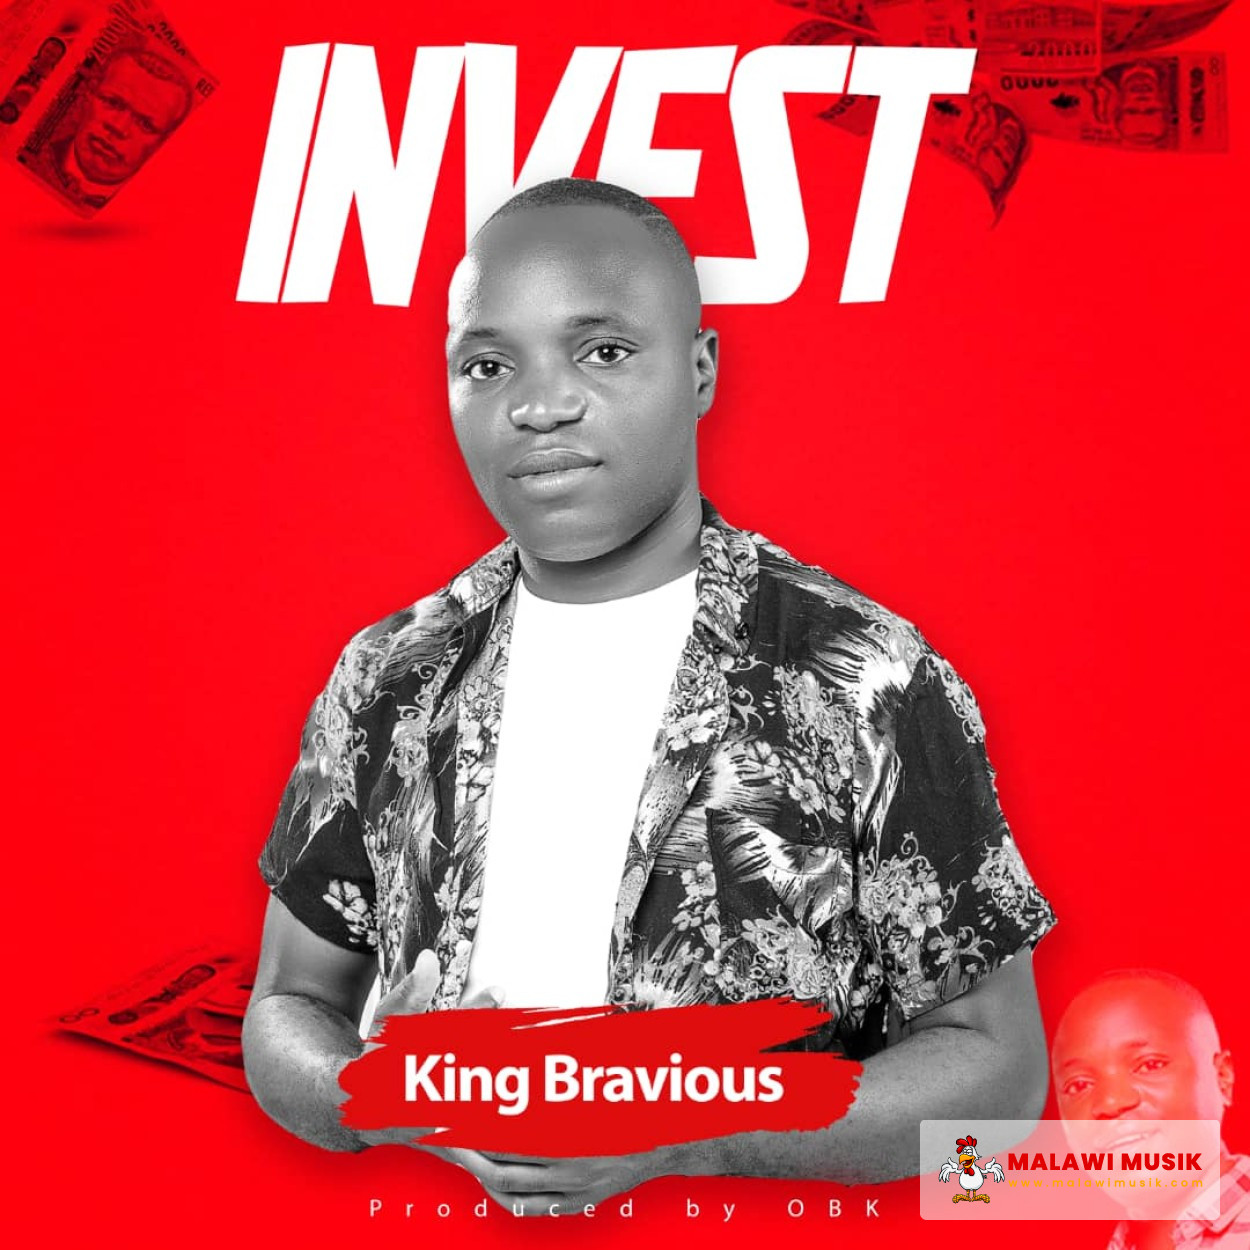 King Bravious-King Bravious - Invest (Prod. OBK BEATS)-song artwork cover